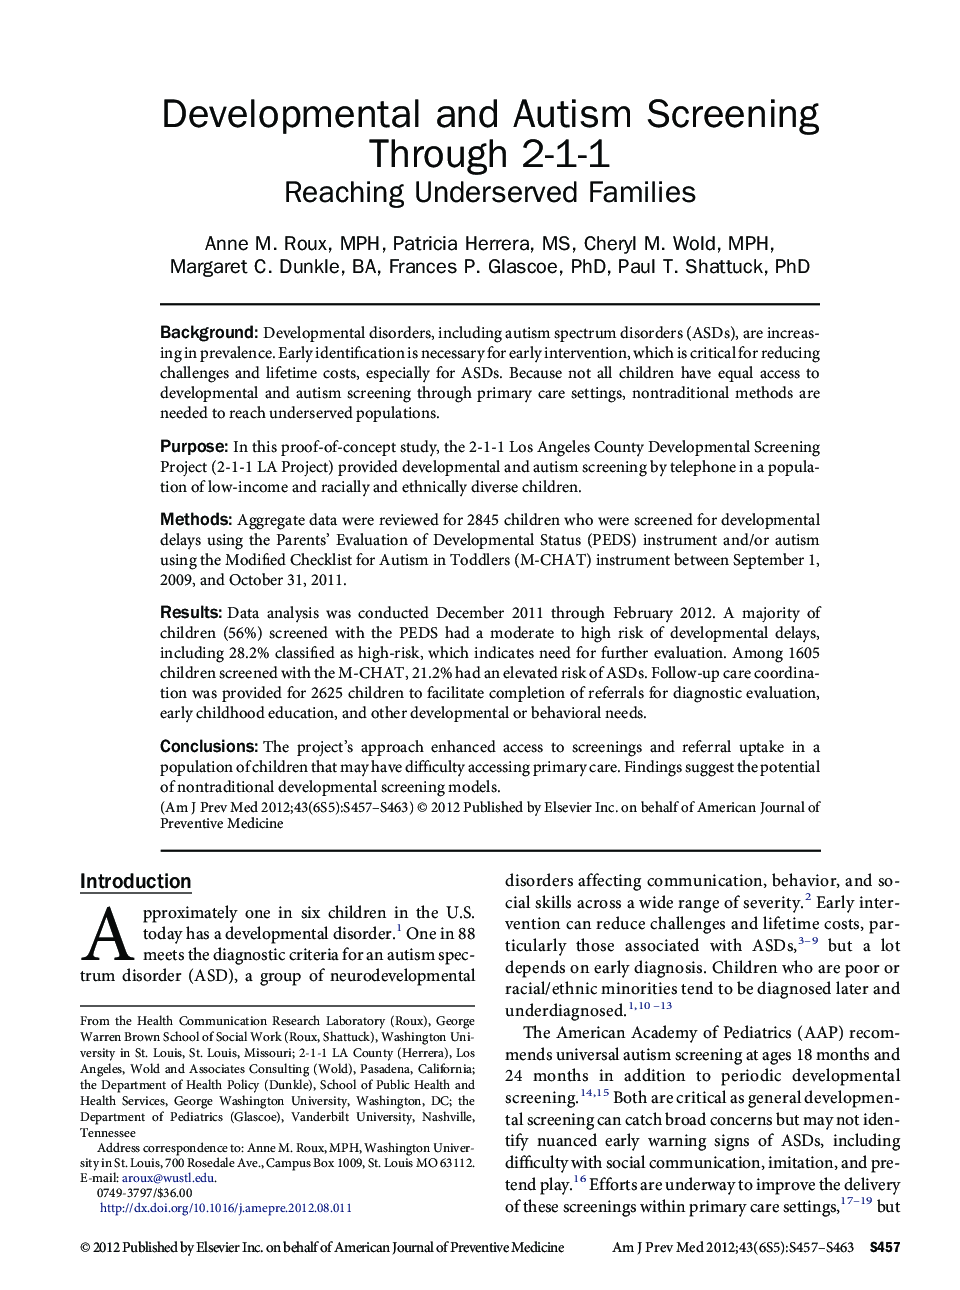 Developmental and Autism Screening Through 2-1-1: Reaching Underserved Families